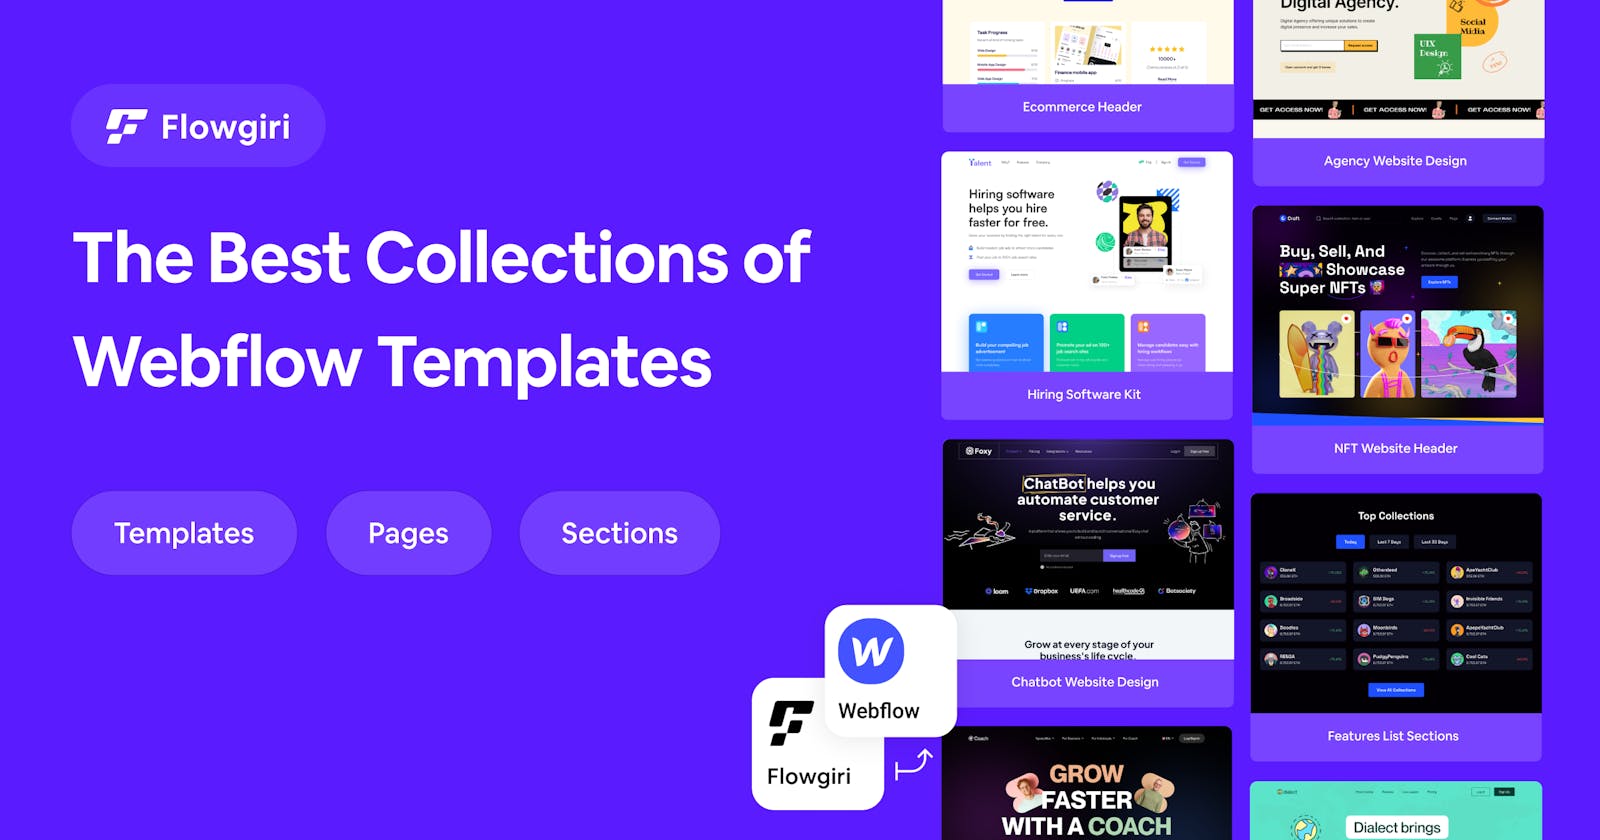 Flowgiri - The Best Collections of Webflow Templates